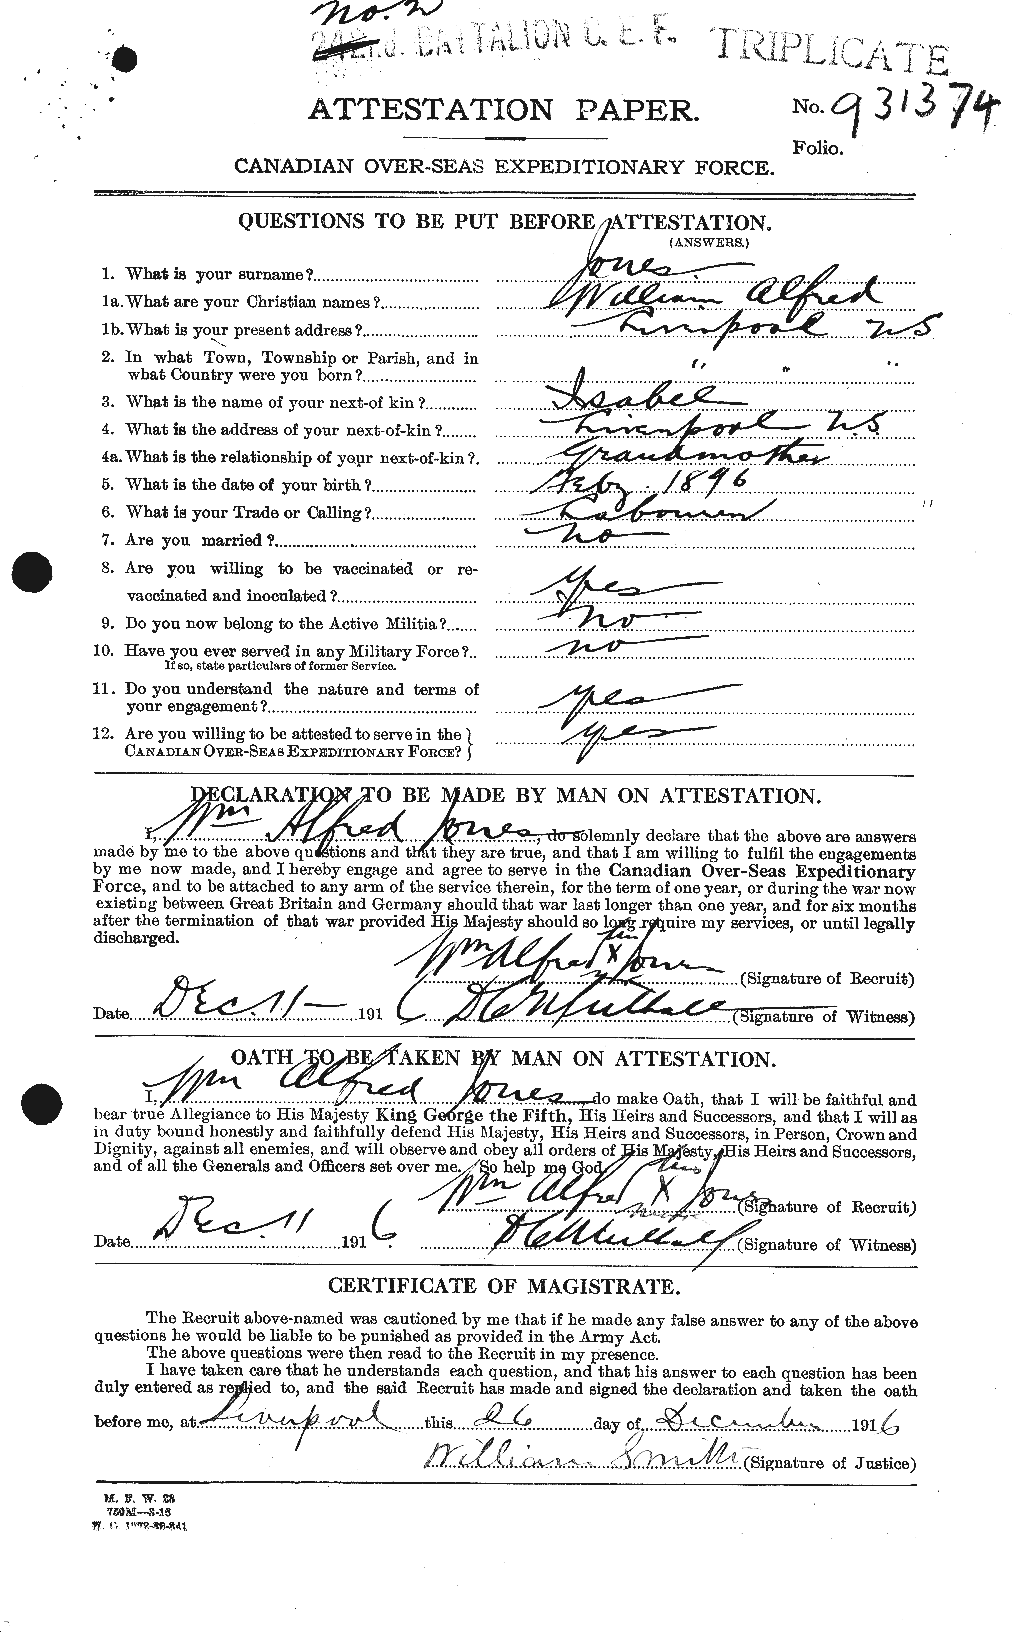 Personnel Records of the First World War - CEF 428456a